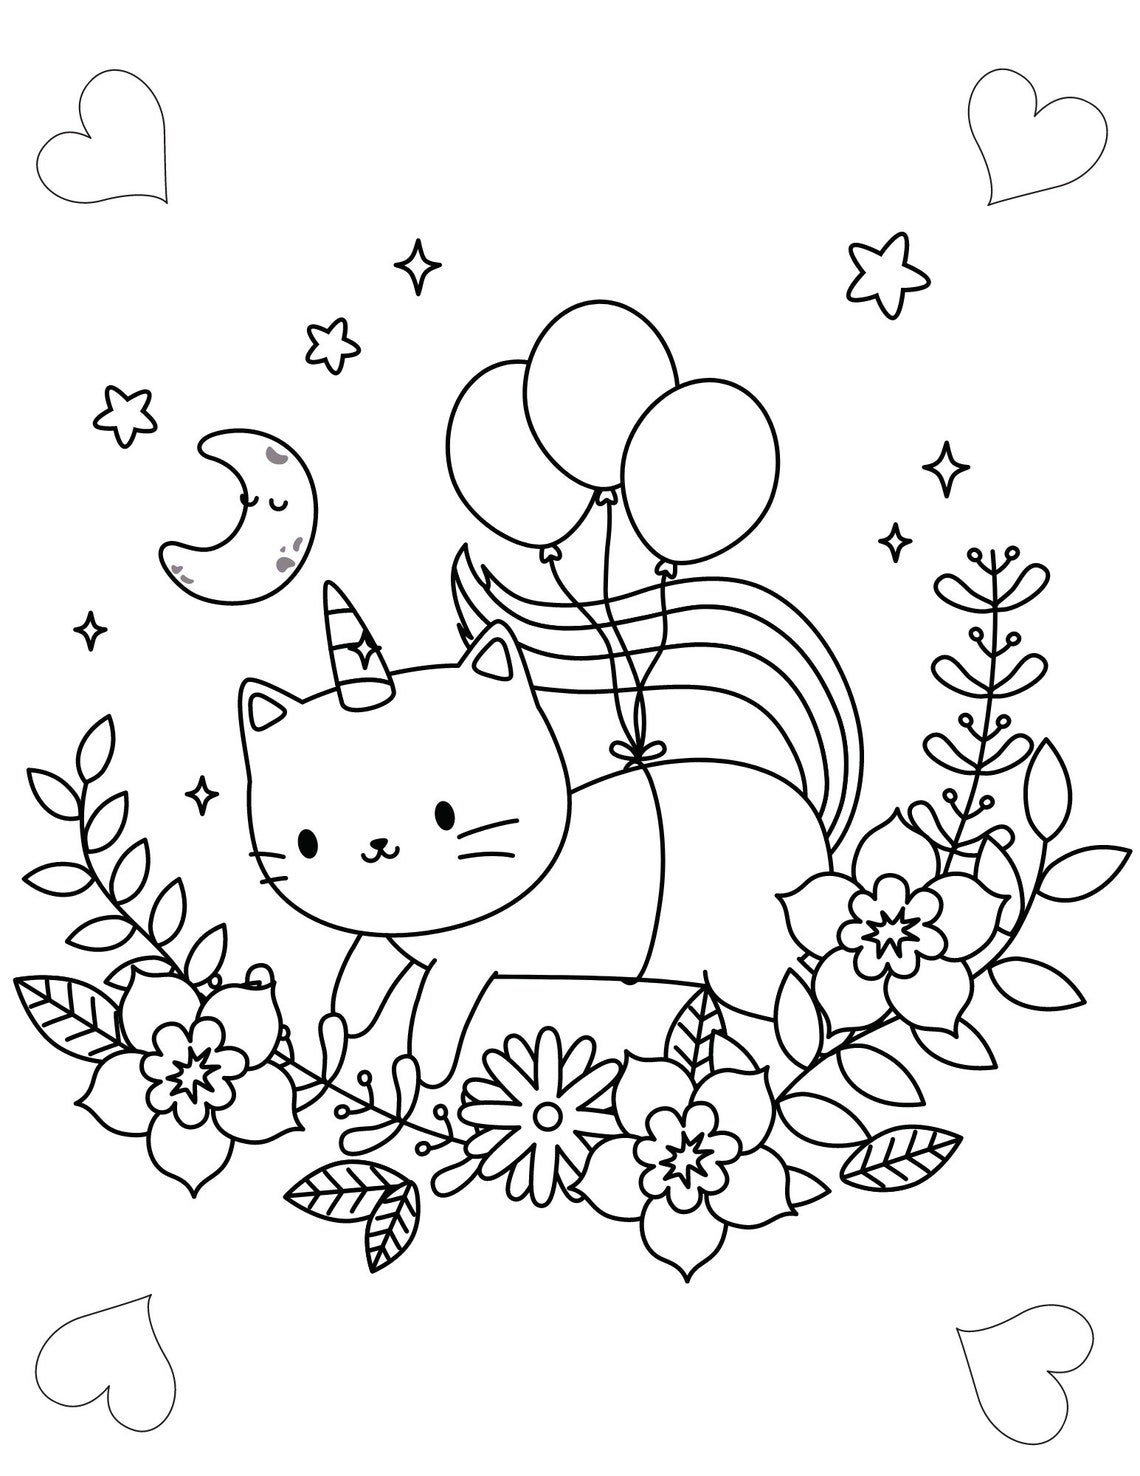 Printable Unicat Coloring Pages for Children / the Cutest - Etsy